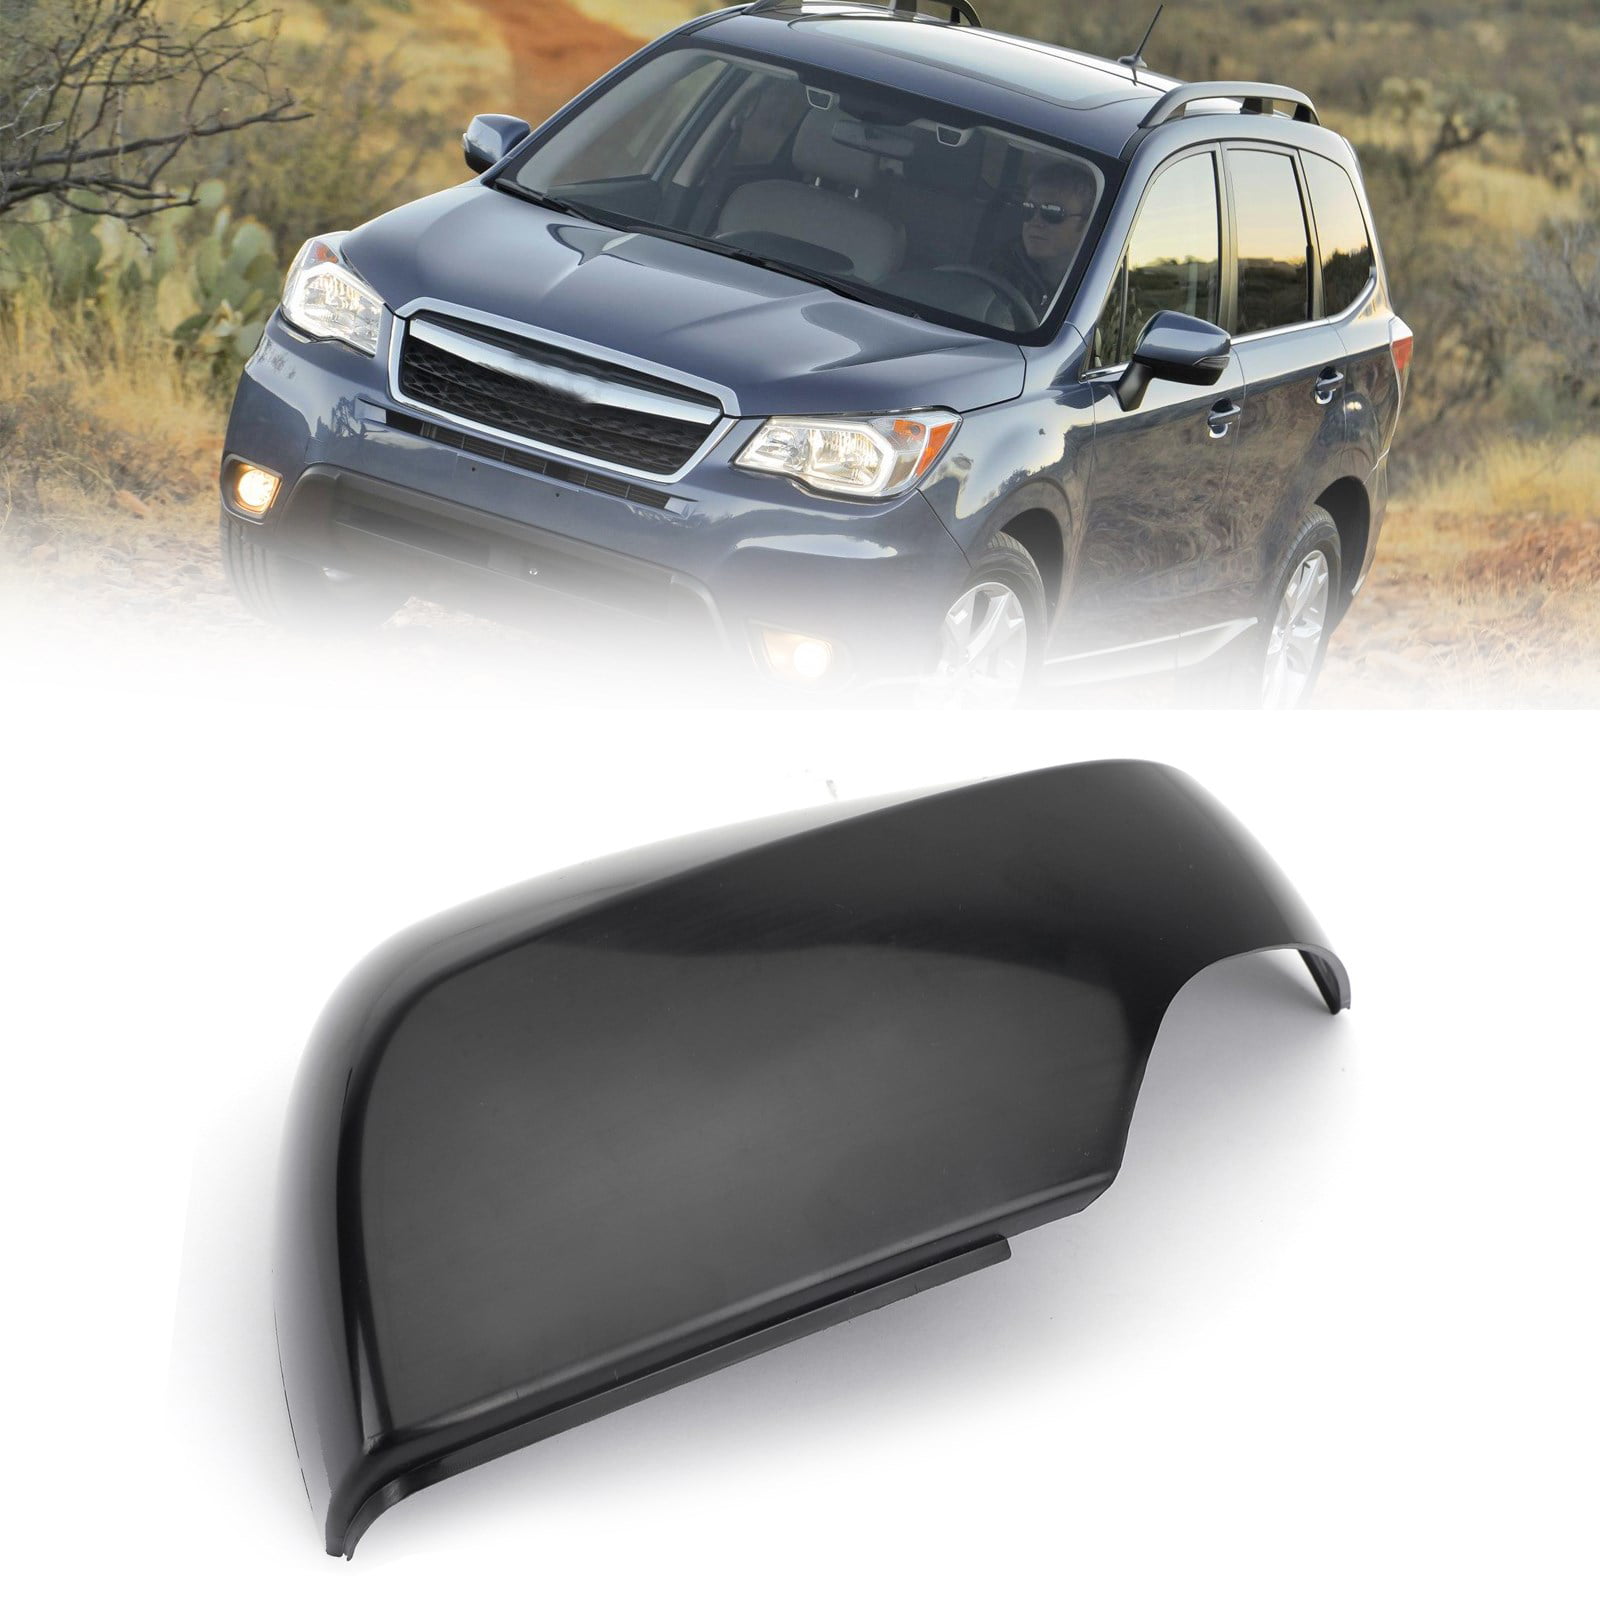 For Forester 09-10 Grille Plastic Silver